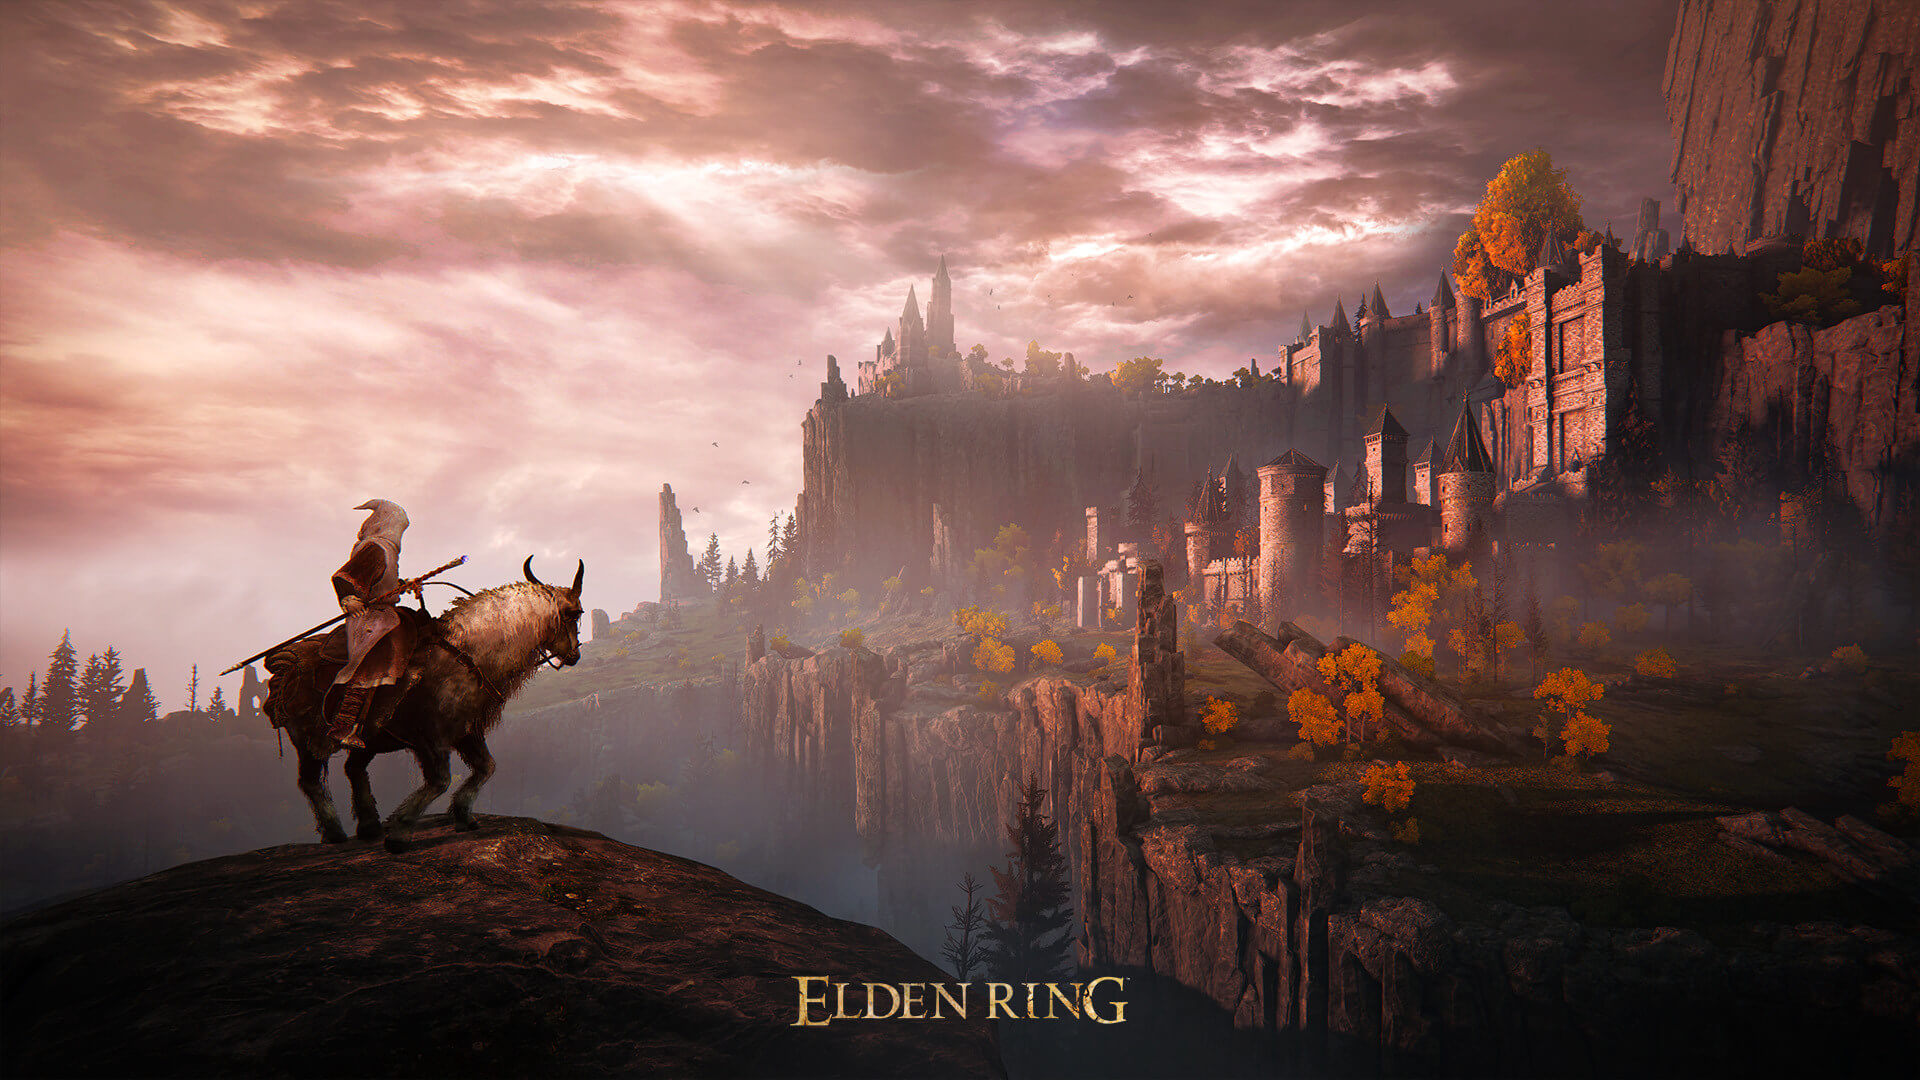 Elden Ring Patch 1.03.3 released, fixes balance issue with Starscourge